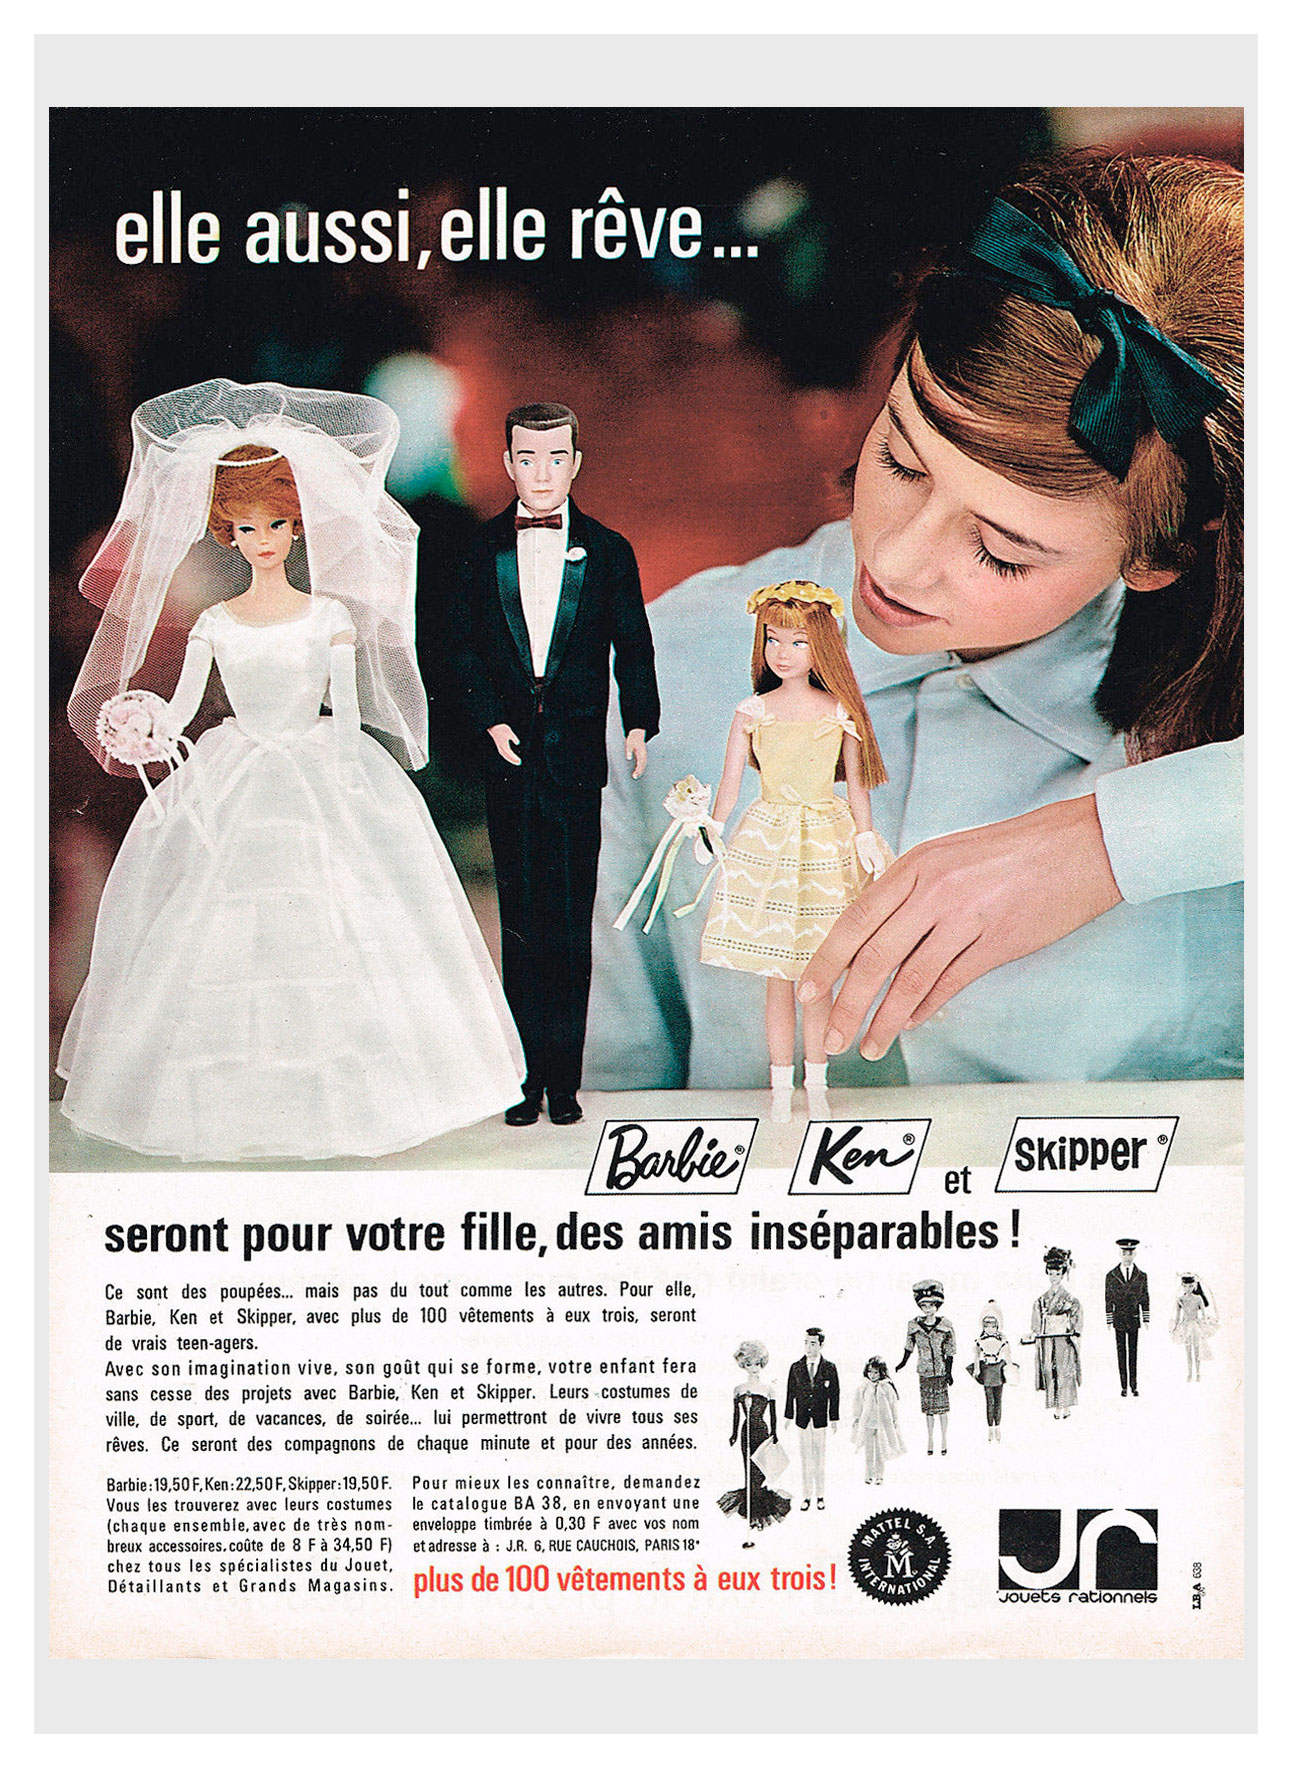 1964 French Barbie advertisement